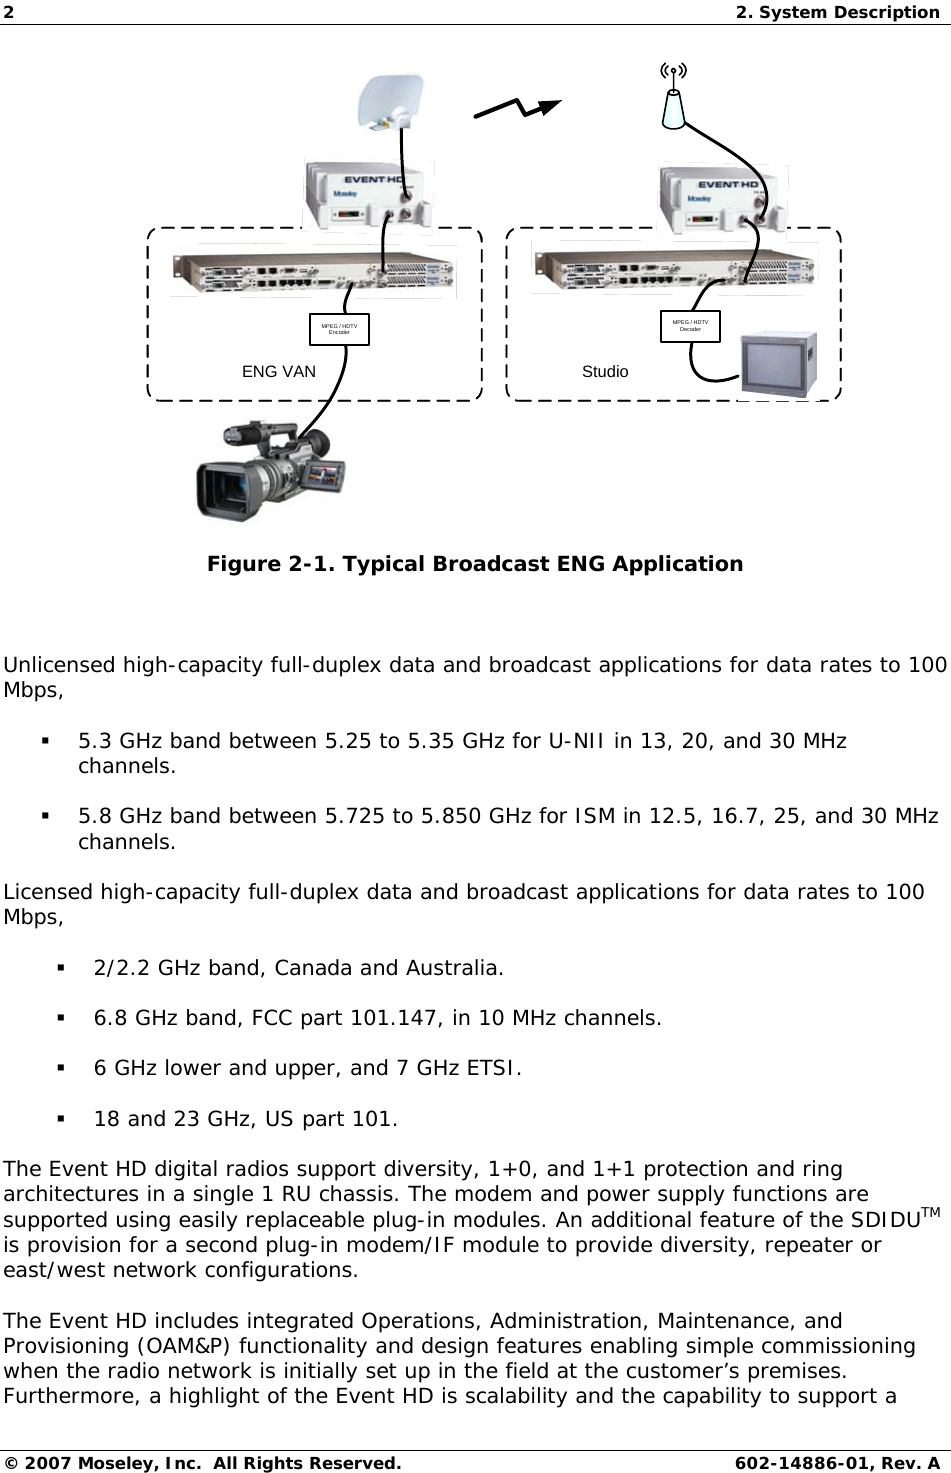 2  2. System Description © 2007 Moseley, Inc.  All Rights Reserved.  602-14886-01, Rev. A ENG VAN StudioMPEG / HDTVEncoderMPEG / HDTVDecoder Figure 2-1. Typical Broadcast ENG Application  Unlicensed high-capacity full-duplex data and broadcast applications for data rates to 100 Mbps,  5.3 GHz band between 5.25 to 5.35 GHz for U-NII in 13, 20, and 30 MHz channels.  5.8 GHz band between 5.725 to 5.850 GHz for ISM in 12.5, 16.7, 25, and 30 MHz channels. Licensed high-capacity full-duplex data and broadcast applications for data rates to 100 Mbps,  2/2.2 GHz band, Canada and Australia.  6.8 GHz band, FCC part 101.147, in 10 MHz channels.  6 GHz lower and upper, and 7 GHz ETSI.  18 and 23 GHz, US part 101. The Event HD digital radios support diversity, 1+0, and 1+1 protection and ring architectures in a single 1 RU chassis. The modem and power supply functions are supported using easily replaceable plug-in modules. An additional feature of the SDIDUTM is provision for a second plug-in modem/IF module to provide diversity, repeater or east/west network configurations. The Event HD includes integrated Operations, Administration, Maintenance, and Provisioning (OAM&amp;P) functionality and design features enabling simple commissioning when the radio network is initially set up in the field at the customer’s premises. Furthermore, a highlight of the Event HD is scalability and the capability to support a 